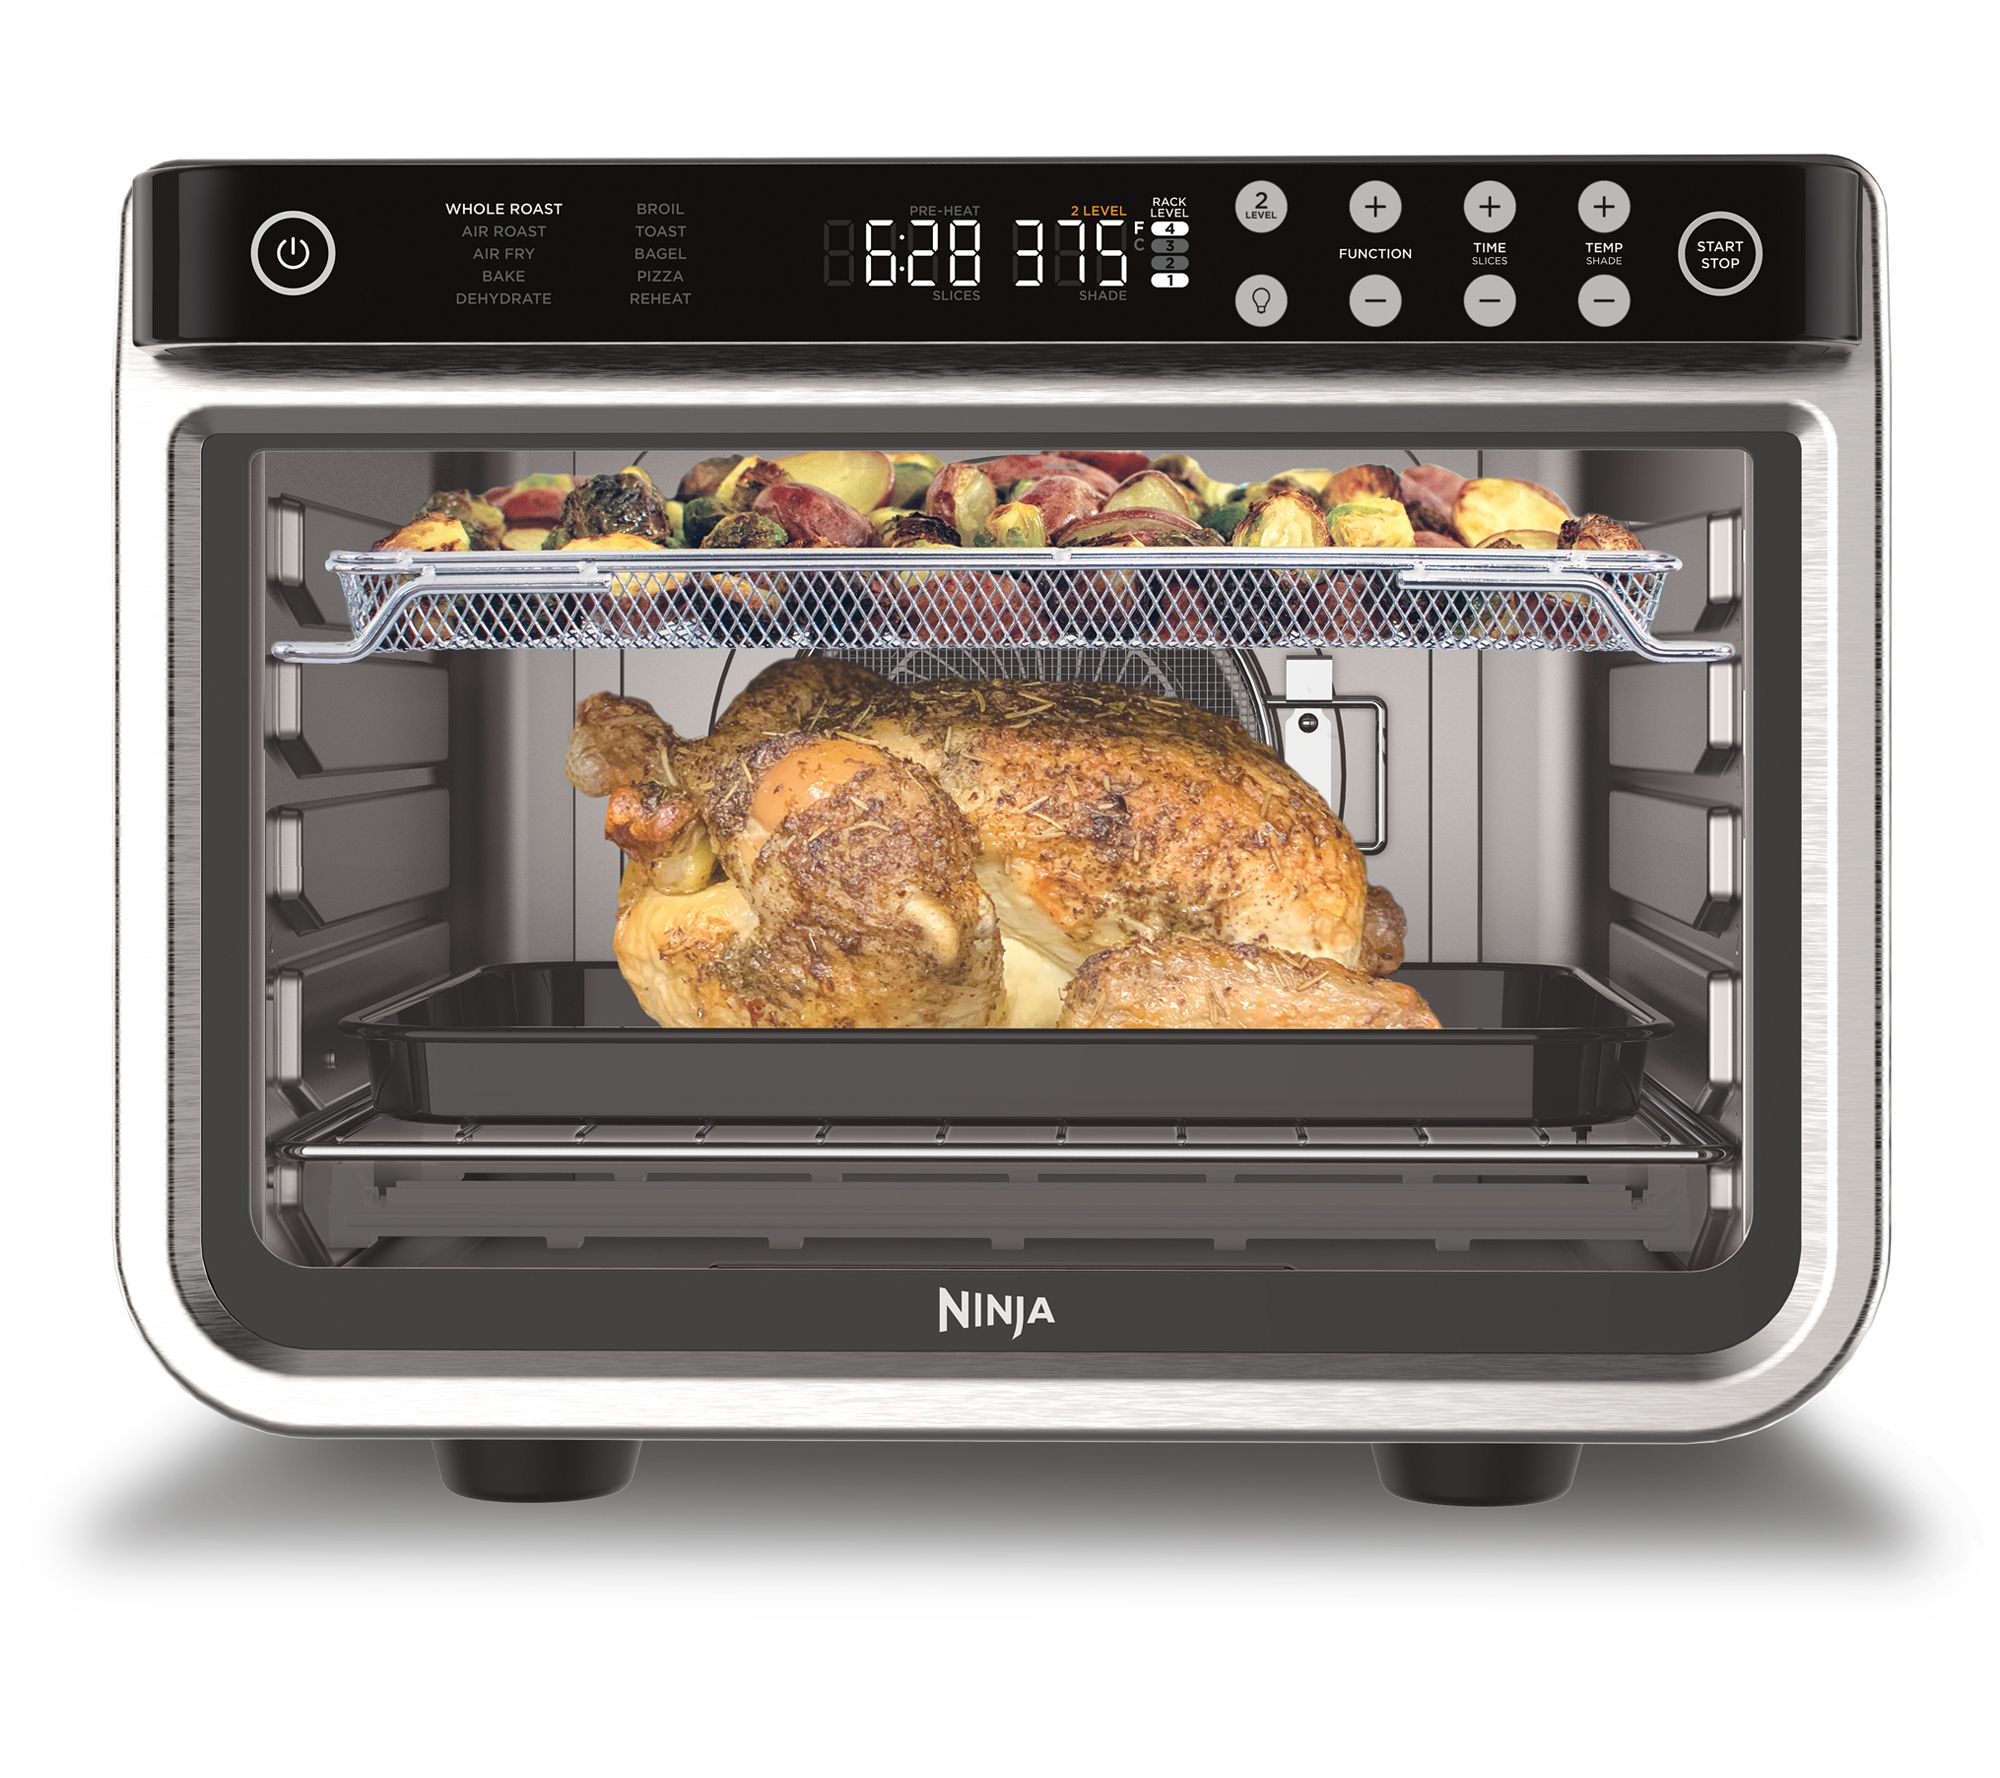 Today Only: QVC Is Offering the Ninja Foodi Double Oven for $240